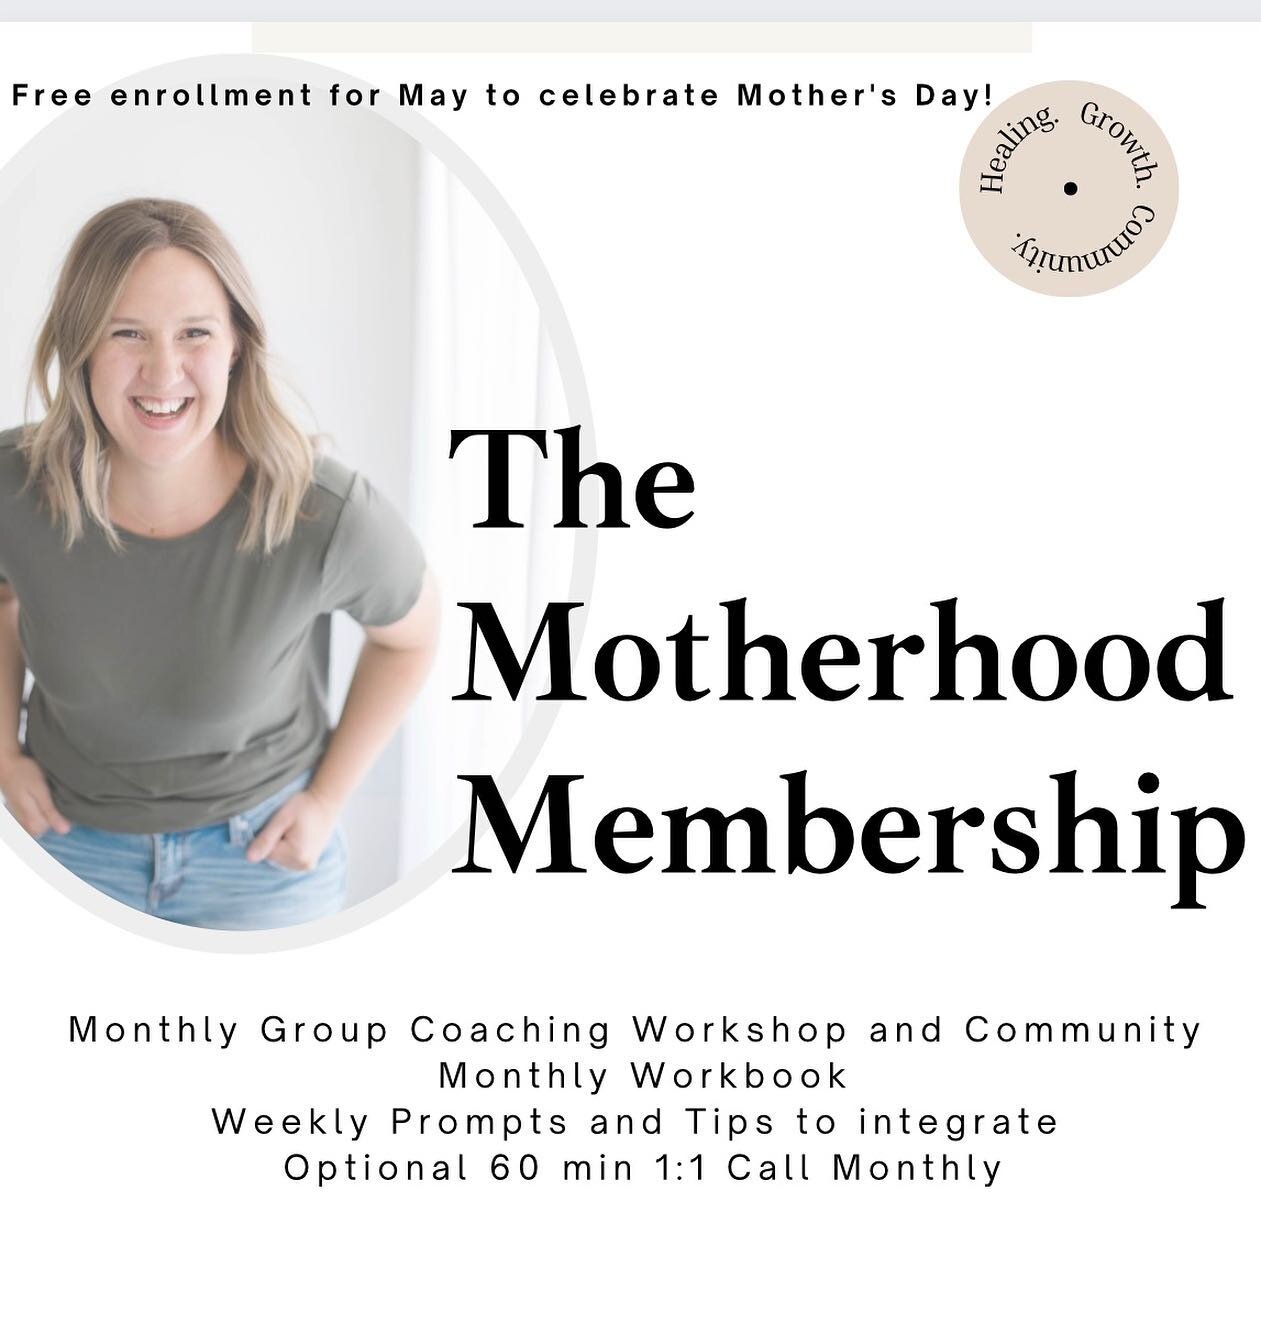 I&rsquo;ve yet to meet a mom who doesn&rsquo;t want to feel more present, connected, and gratitude with her kids. 

I&rsquo;ve met a LOT of moms who don&rsquo;t know HOW to have that. A lot of moms struggling so much with the overwhelm, stress, anxio